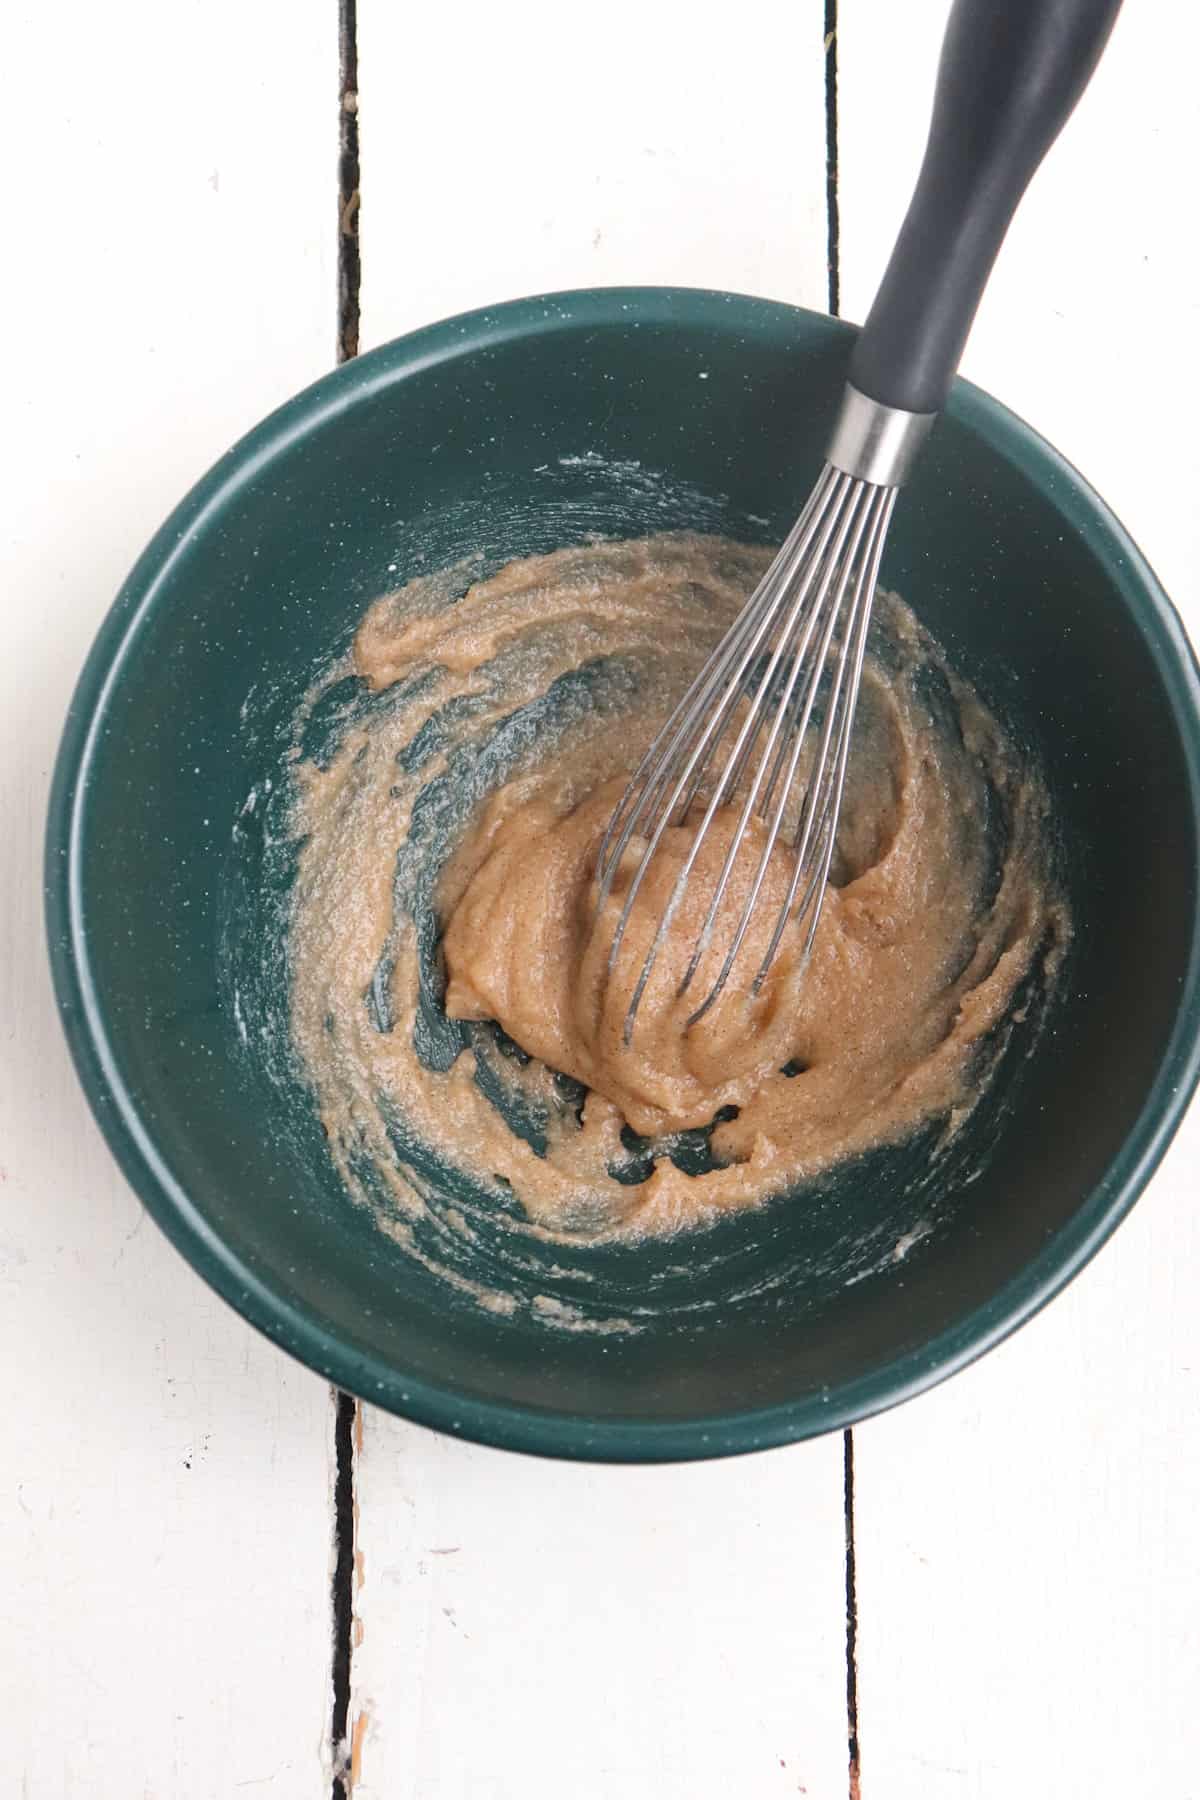 vanilla, cream cheese, and sugar whisked in a small green bowl.